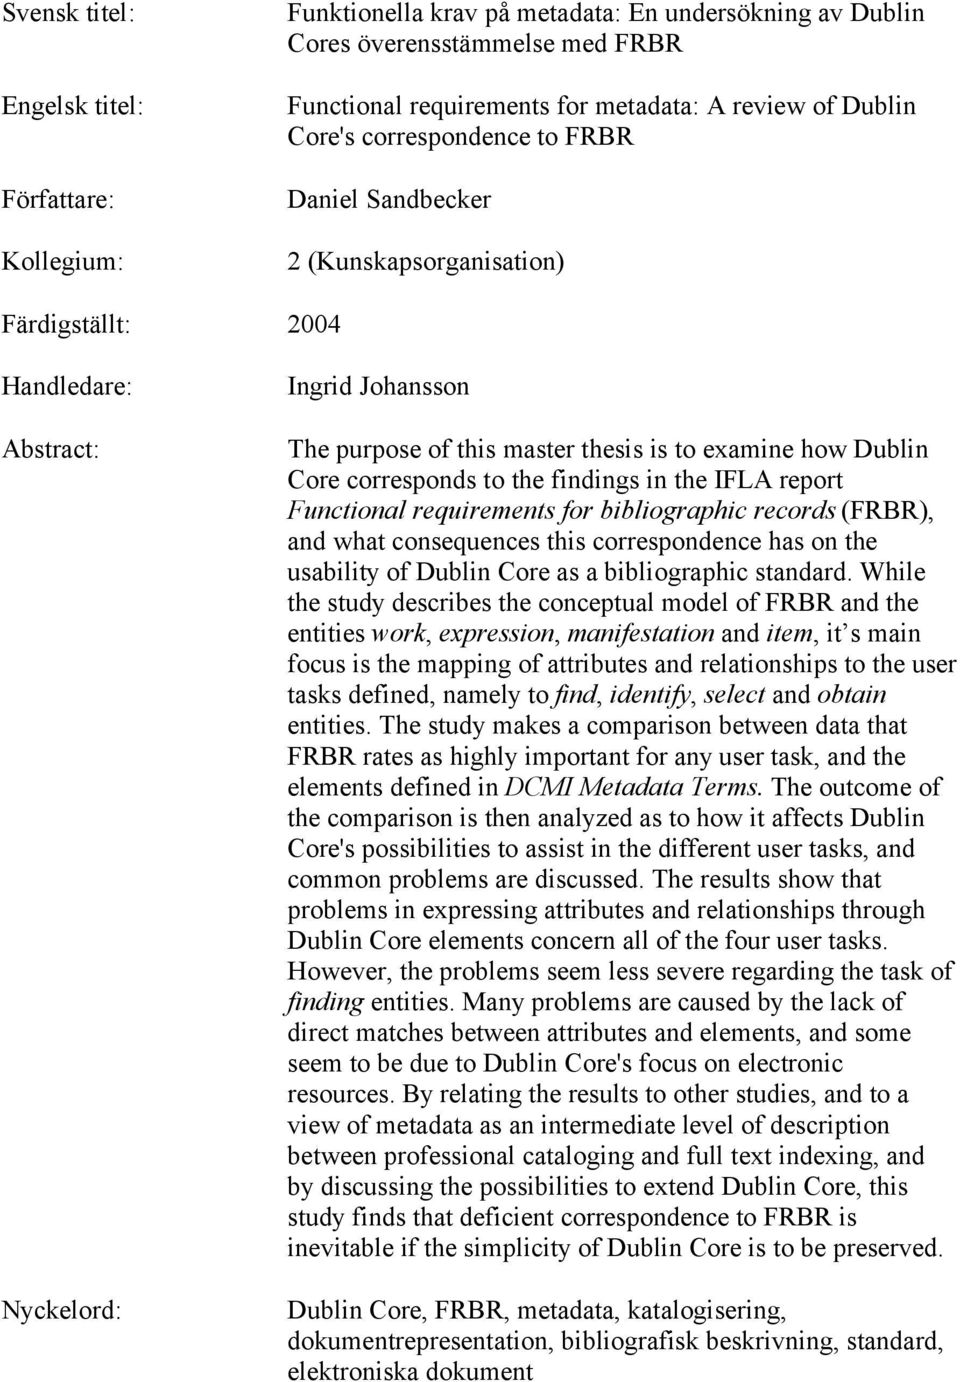 Dublin Core corresponds to the findings in the IFLA report Functional requirements for bibliographic records (FRBR), and what consequences this correspondence has on the usability of Dublin Core as a